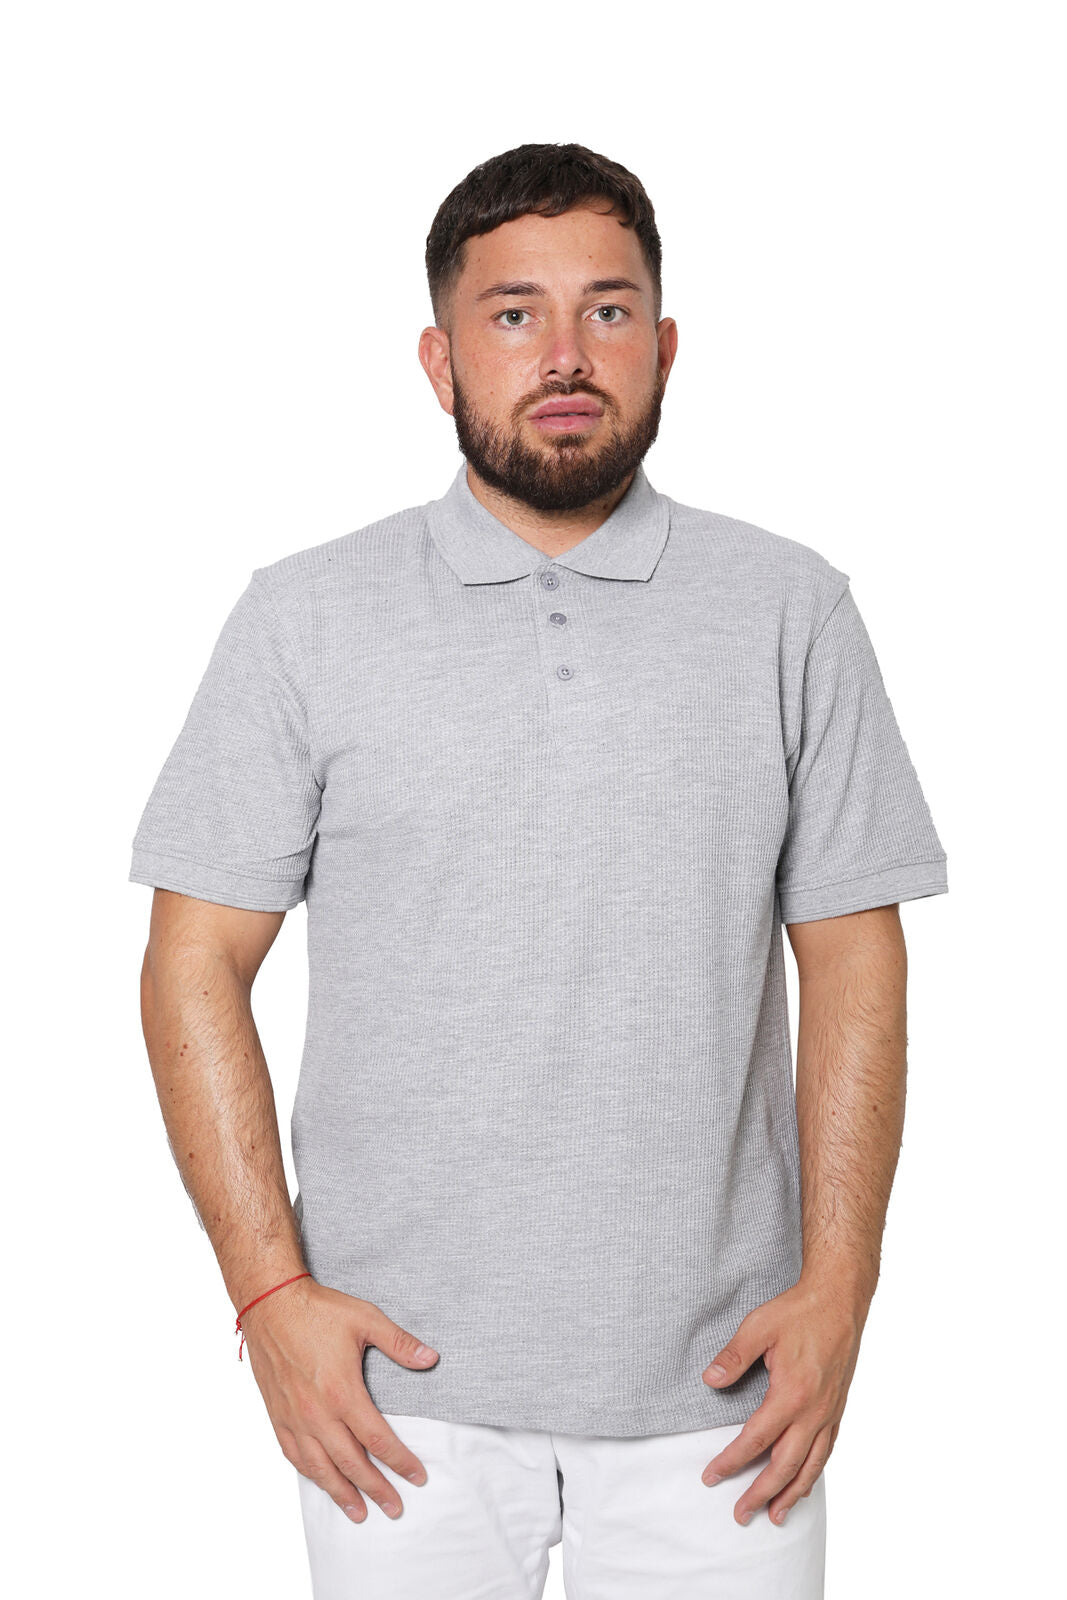 Men's Short Sleeve T-Shirt with 3 Buttons and Pique Polo Collar - Light Grey